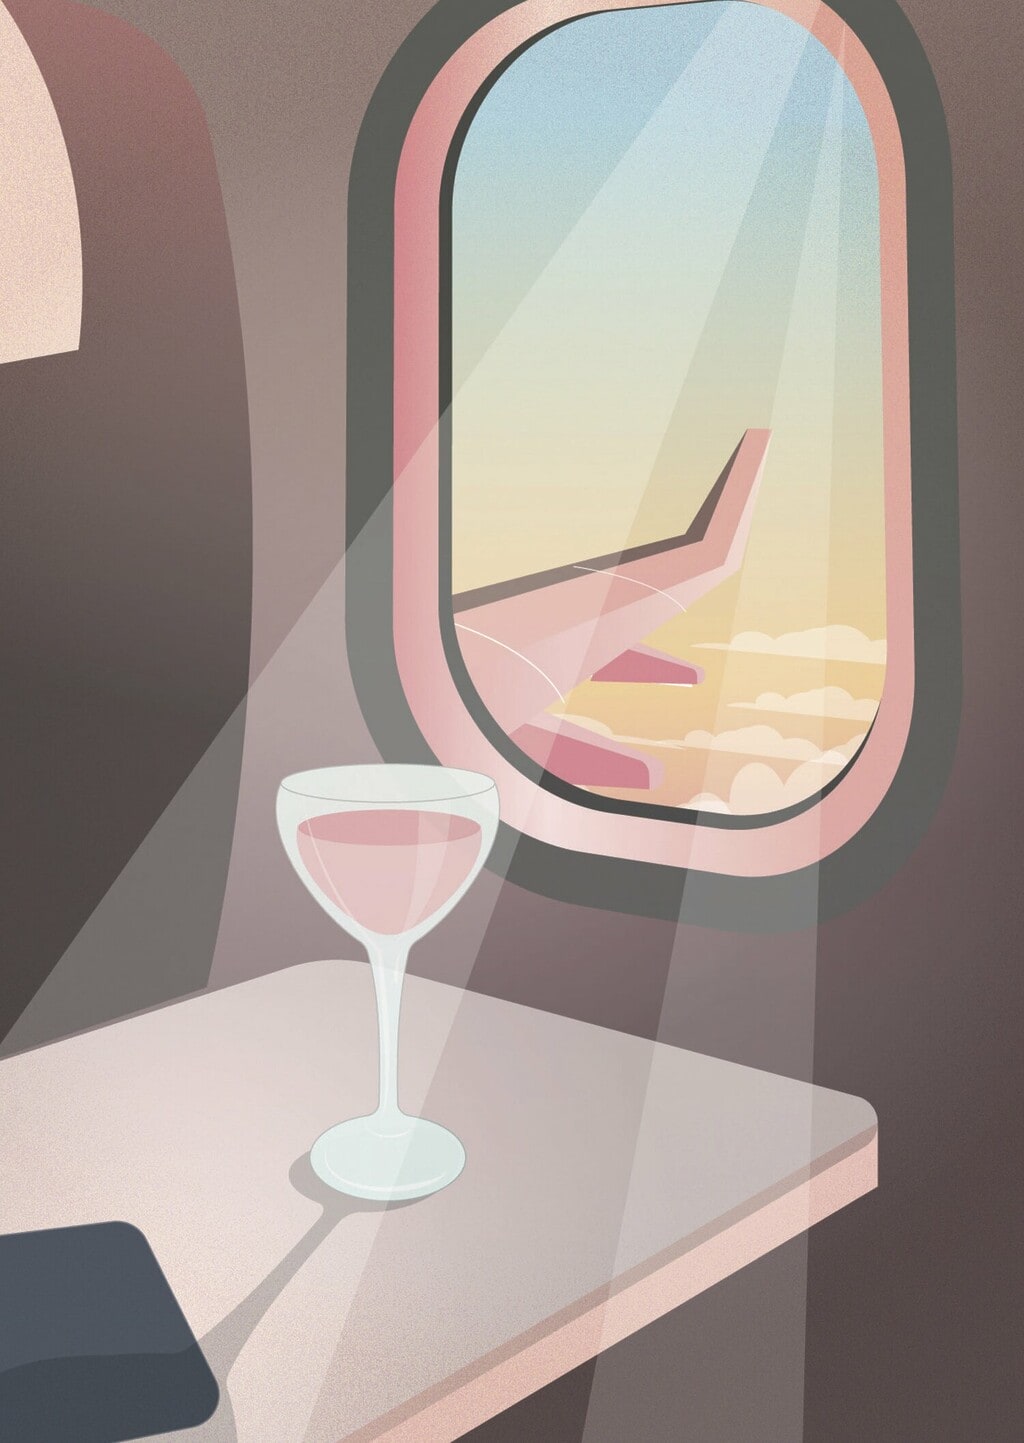 Clipper, Ponsonby cocktail bar, promotional image of cocktail sketch on a plane. 